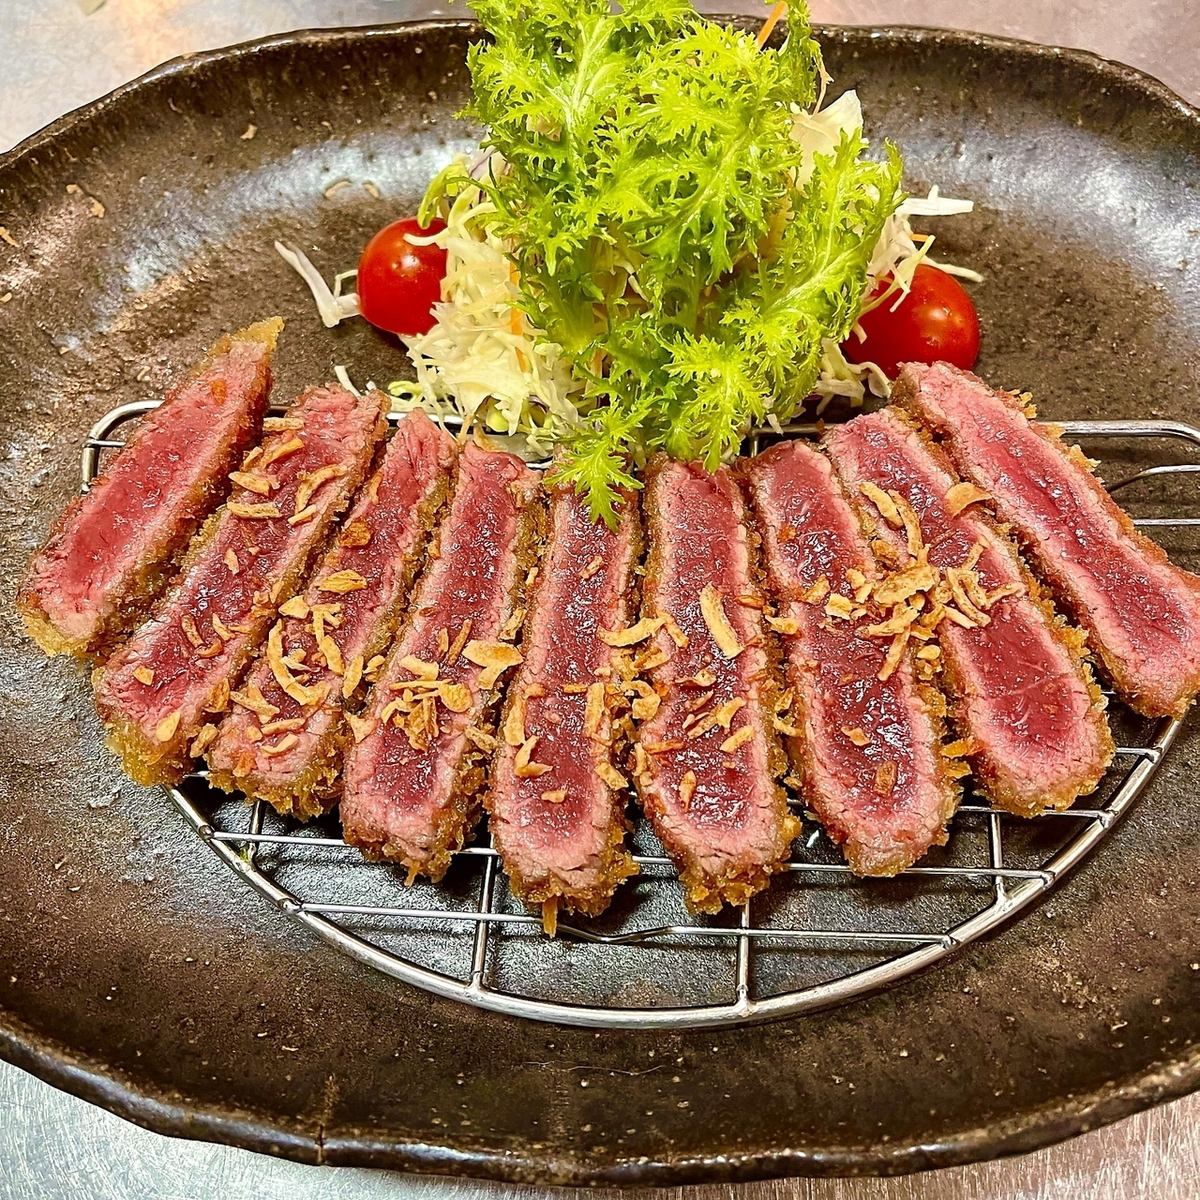 A 5-minute walk from Beppu Station! A completely private room for a banquet ◎ Standing behind Beppu Station [Beppu Beef Cutlet Waraiya]